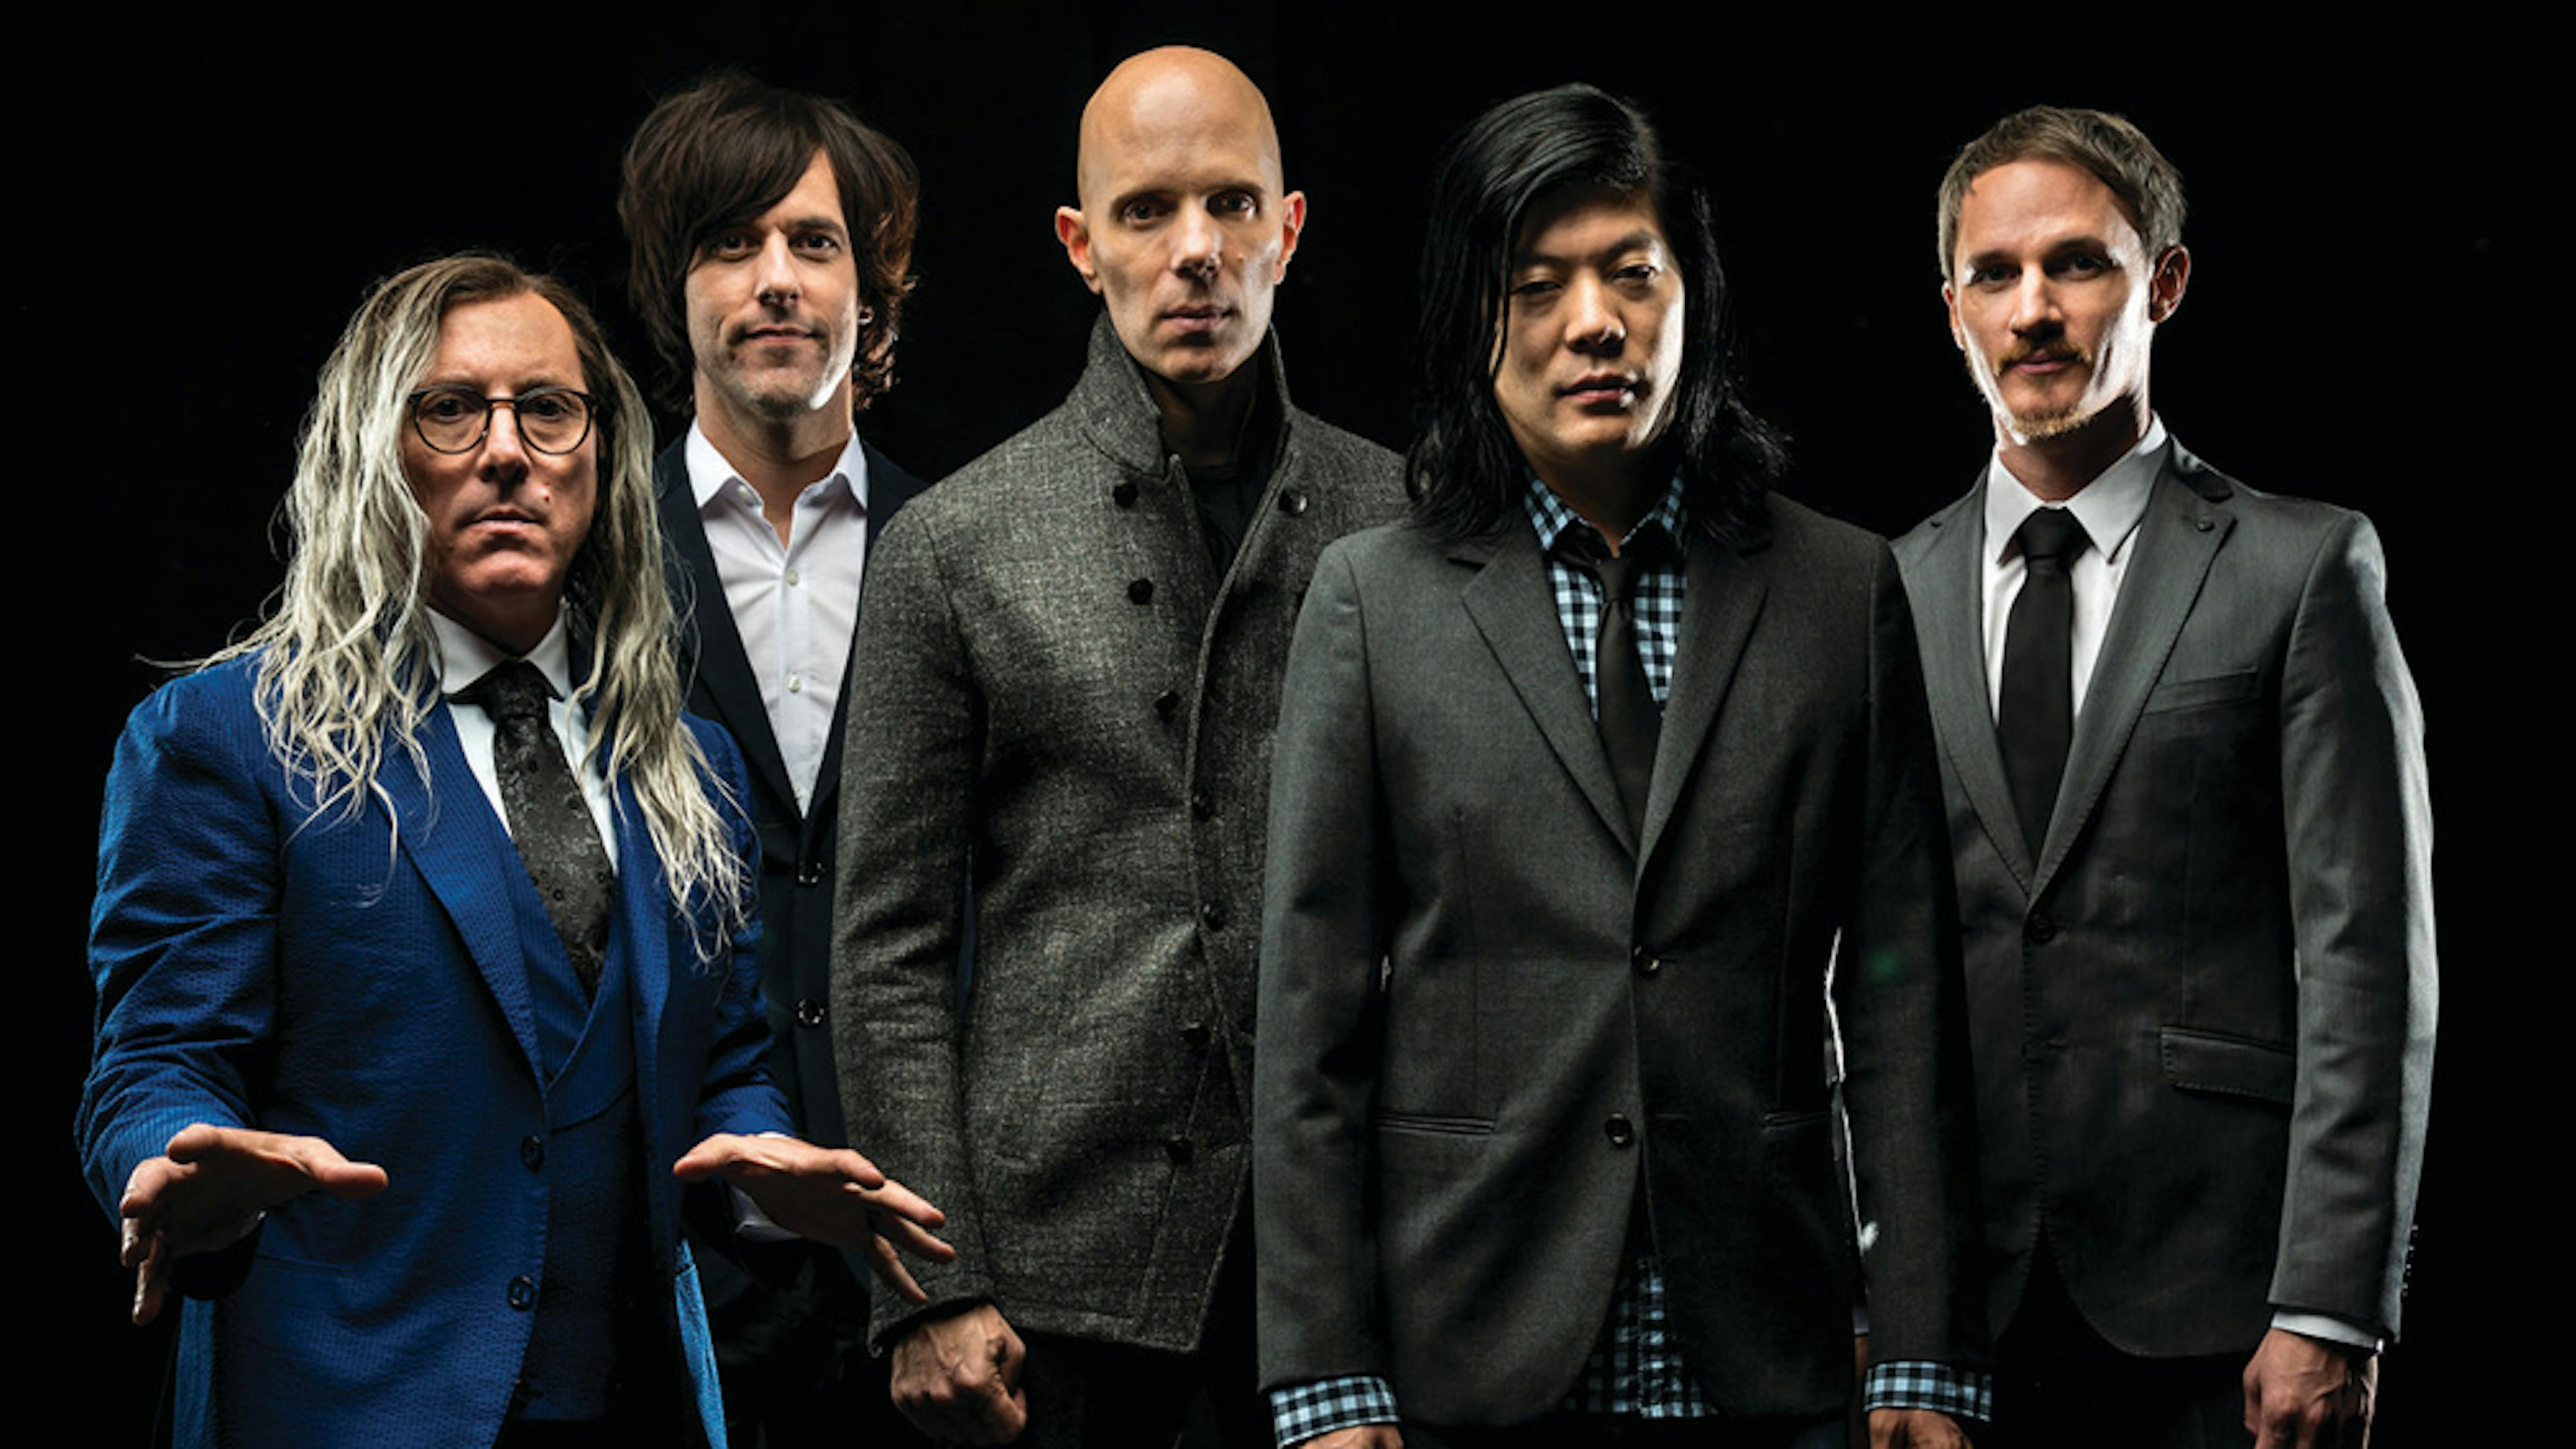 Listen To A Perfect Circle's AC/DC Cover